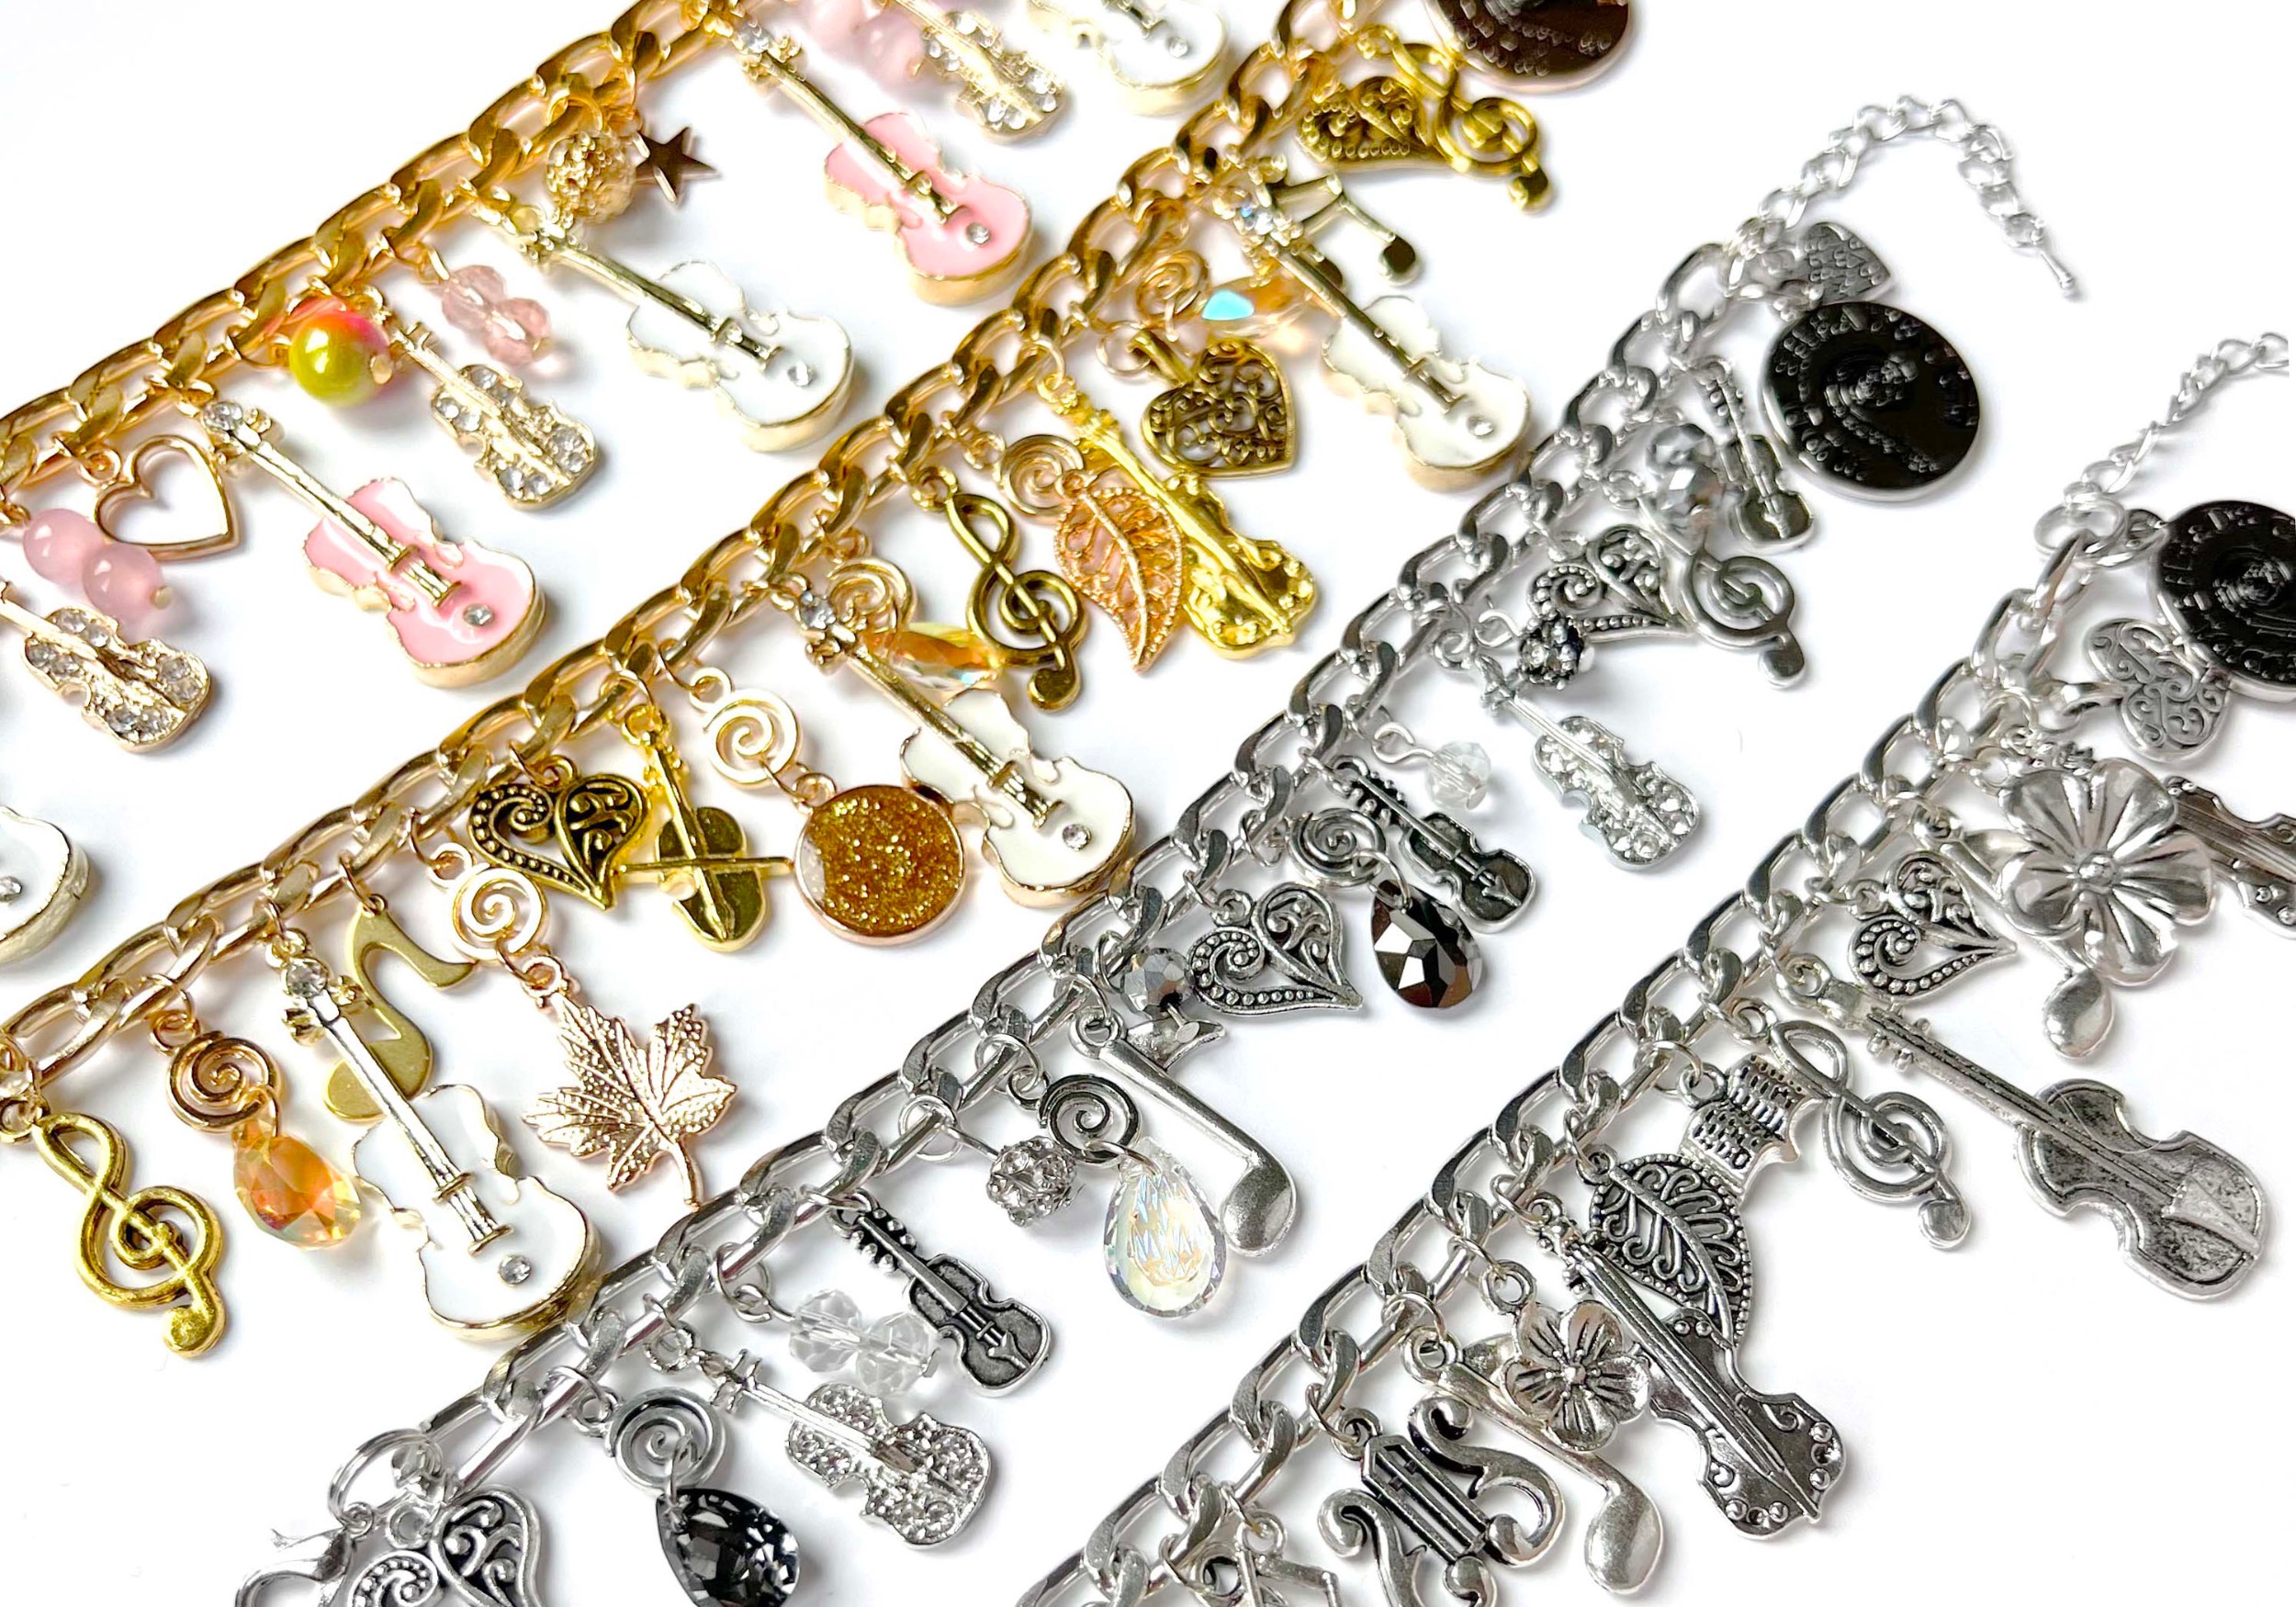 four types of charm bracelets in silver and gold featuring violins, music symbols, crystals and other ornate beads and charms